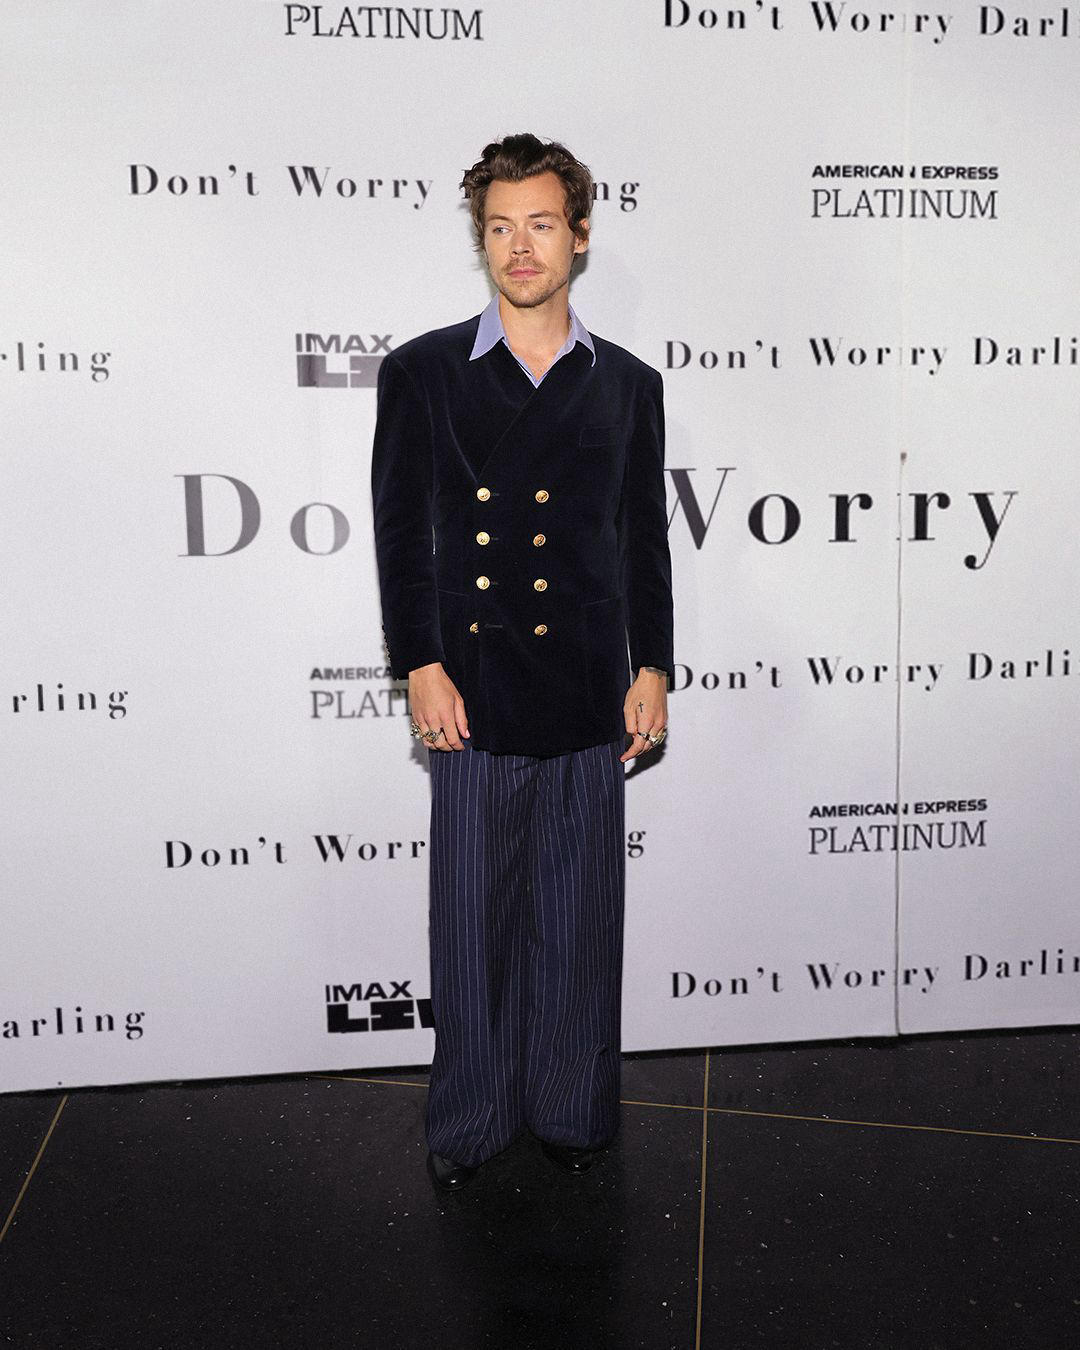 image  1 Harry Styles was captured wearing a sartorial look from the Exquisite Gucci collection at the screen